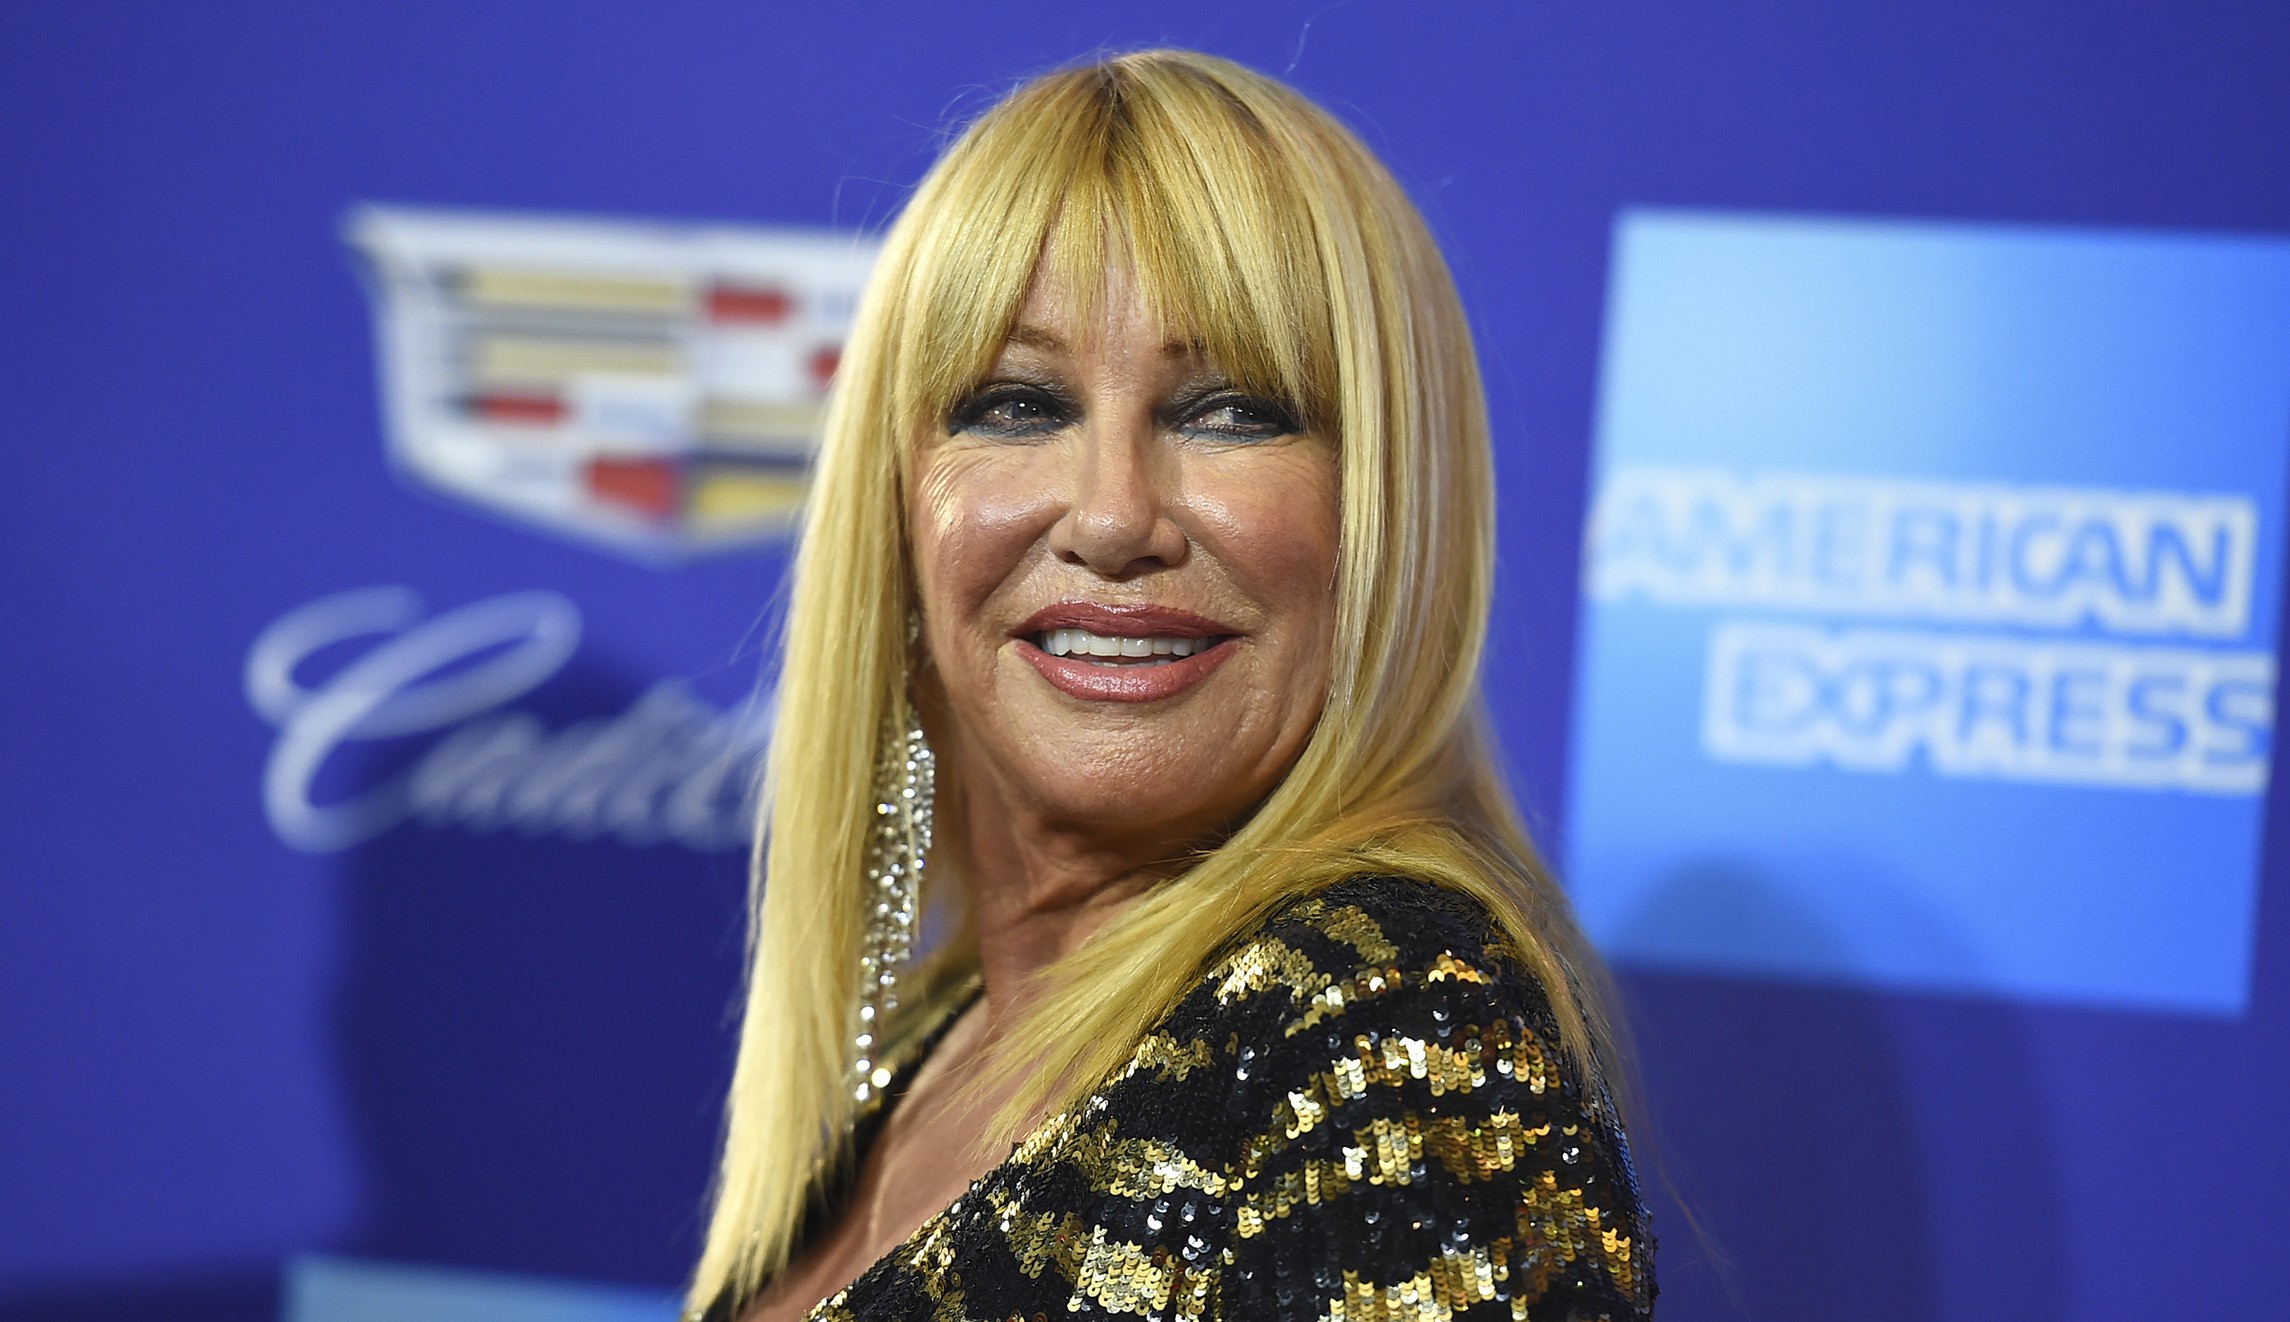 Suzanne Somers on Trump: 'I'm happy about him'